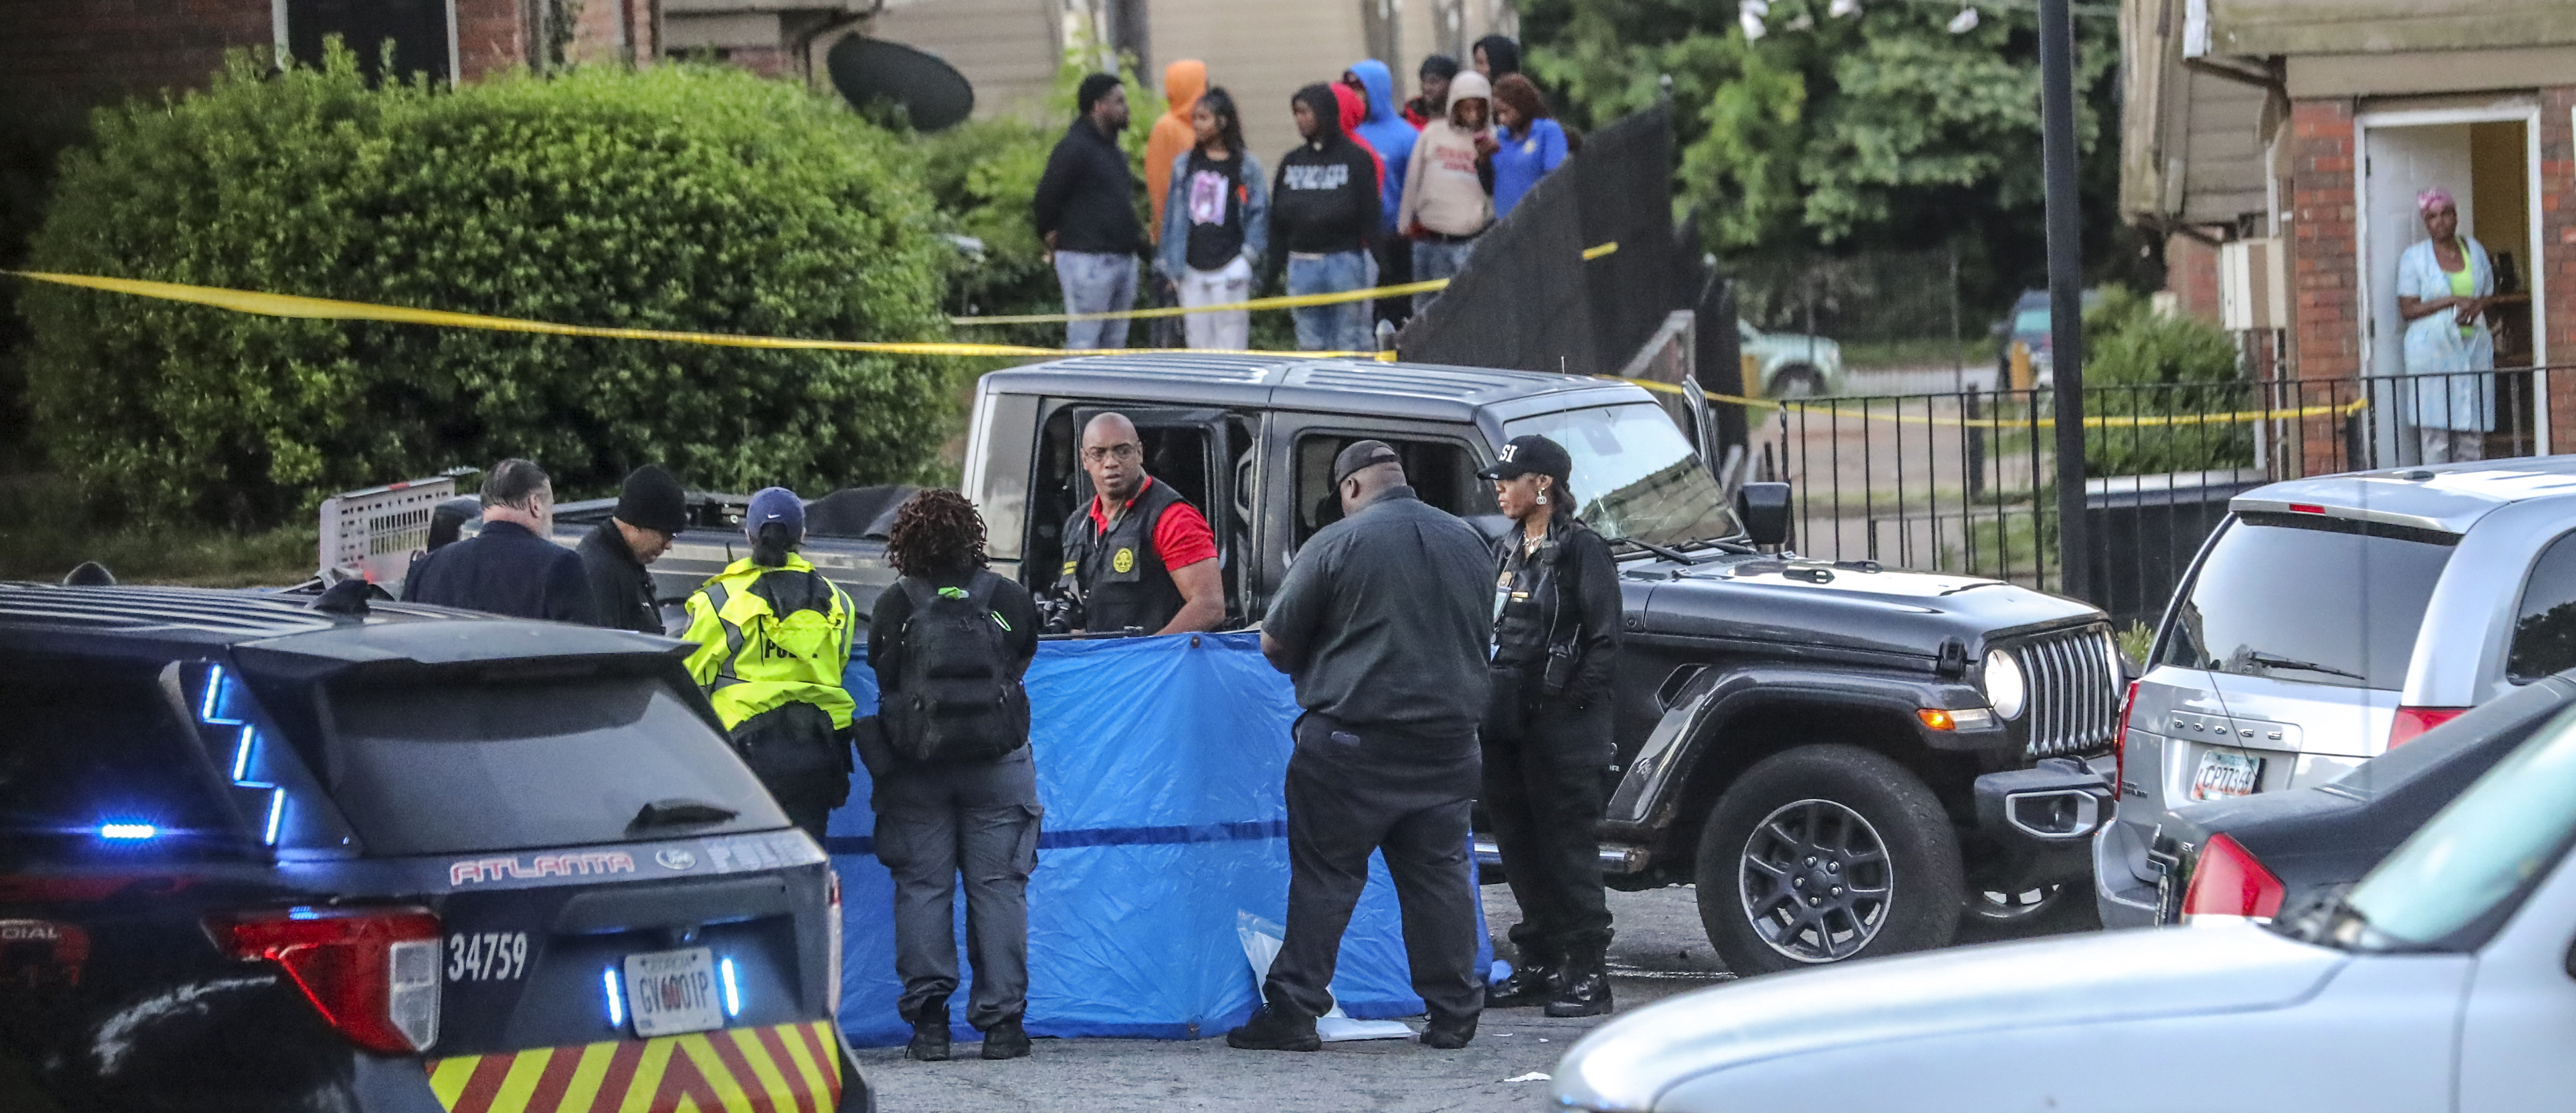 Atlanta police investigate after the body of a shooting victim was found in May at Forest Cove Apartments. Another person was wounded in the shooting. Since 2009, 19 homicides have occurred at Forest Cove, and a judge has ordered that the complex be demolished. (John Spink / John.Spink@ajc.com)